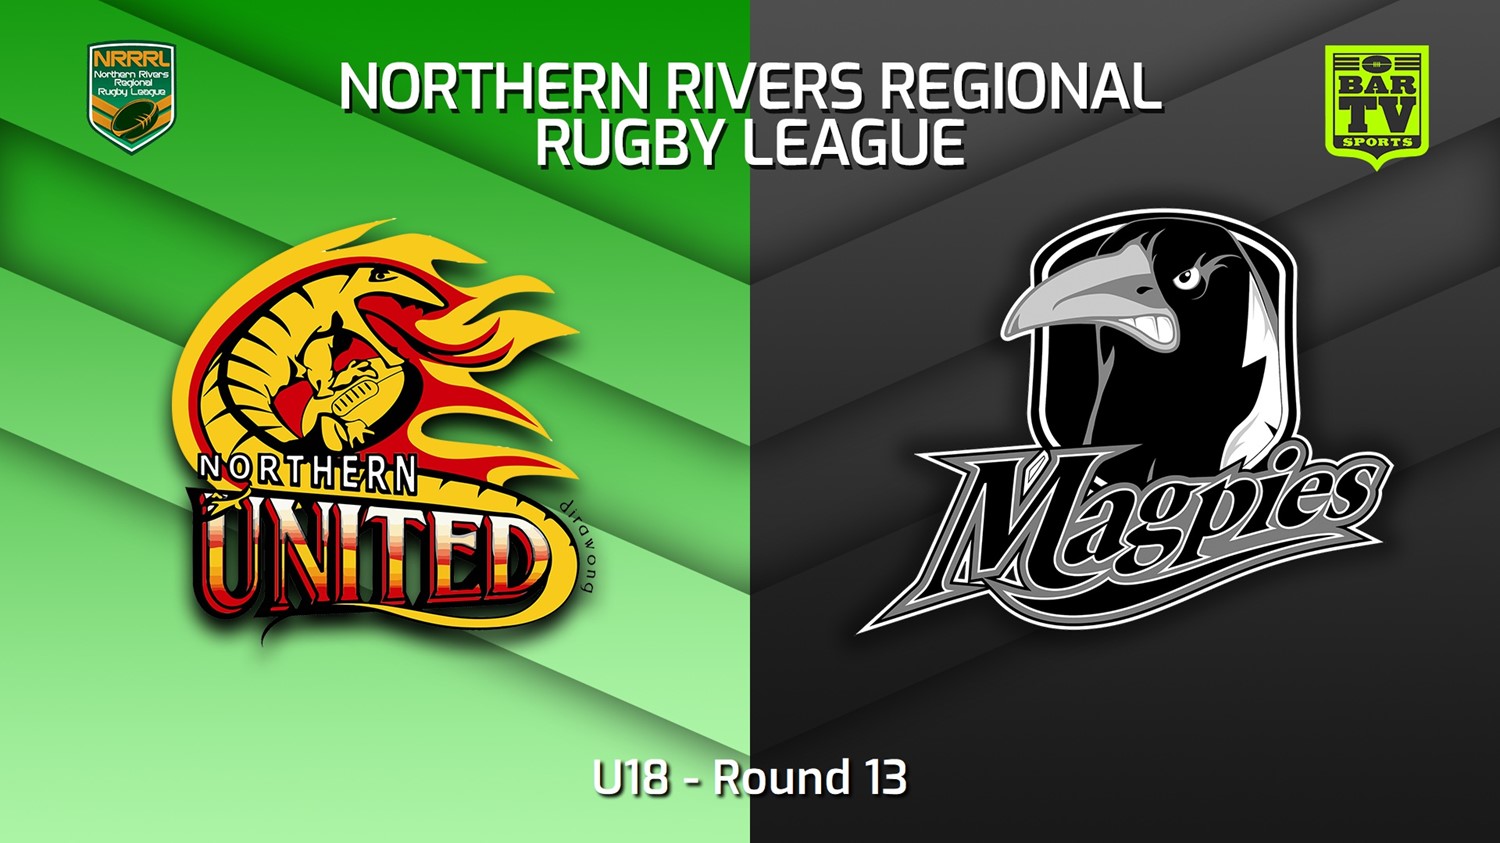 230715-Northern Rivers Round 13 - U18 - Northern United v Lower Clarence Magpies Slate Image